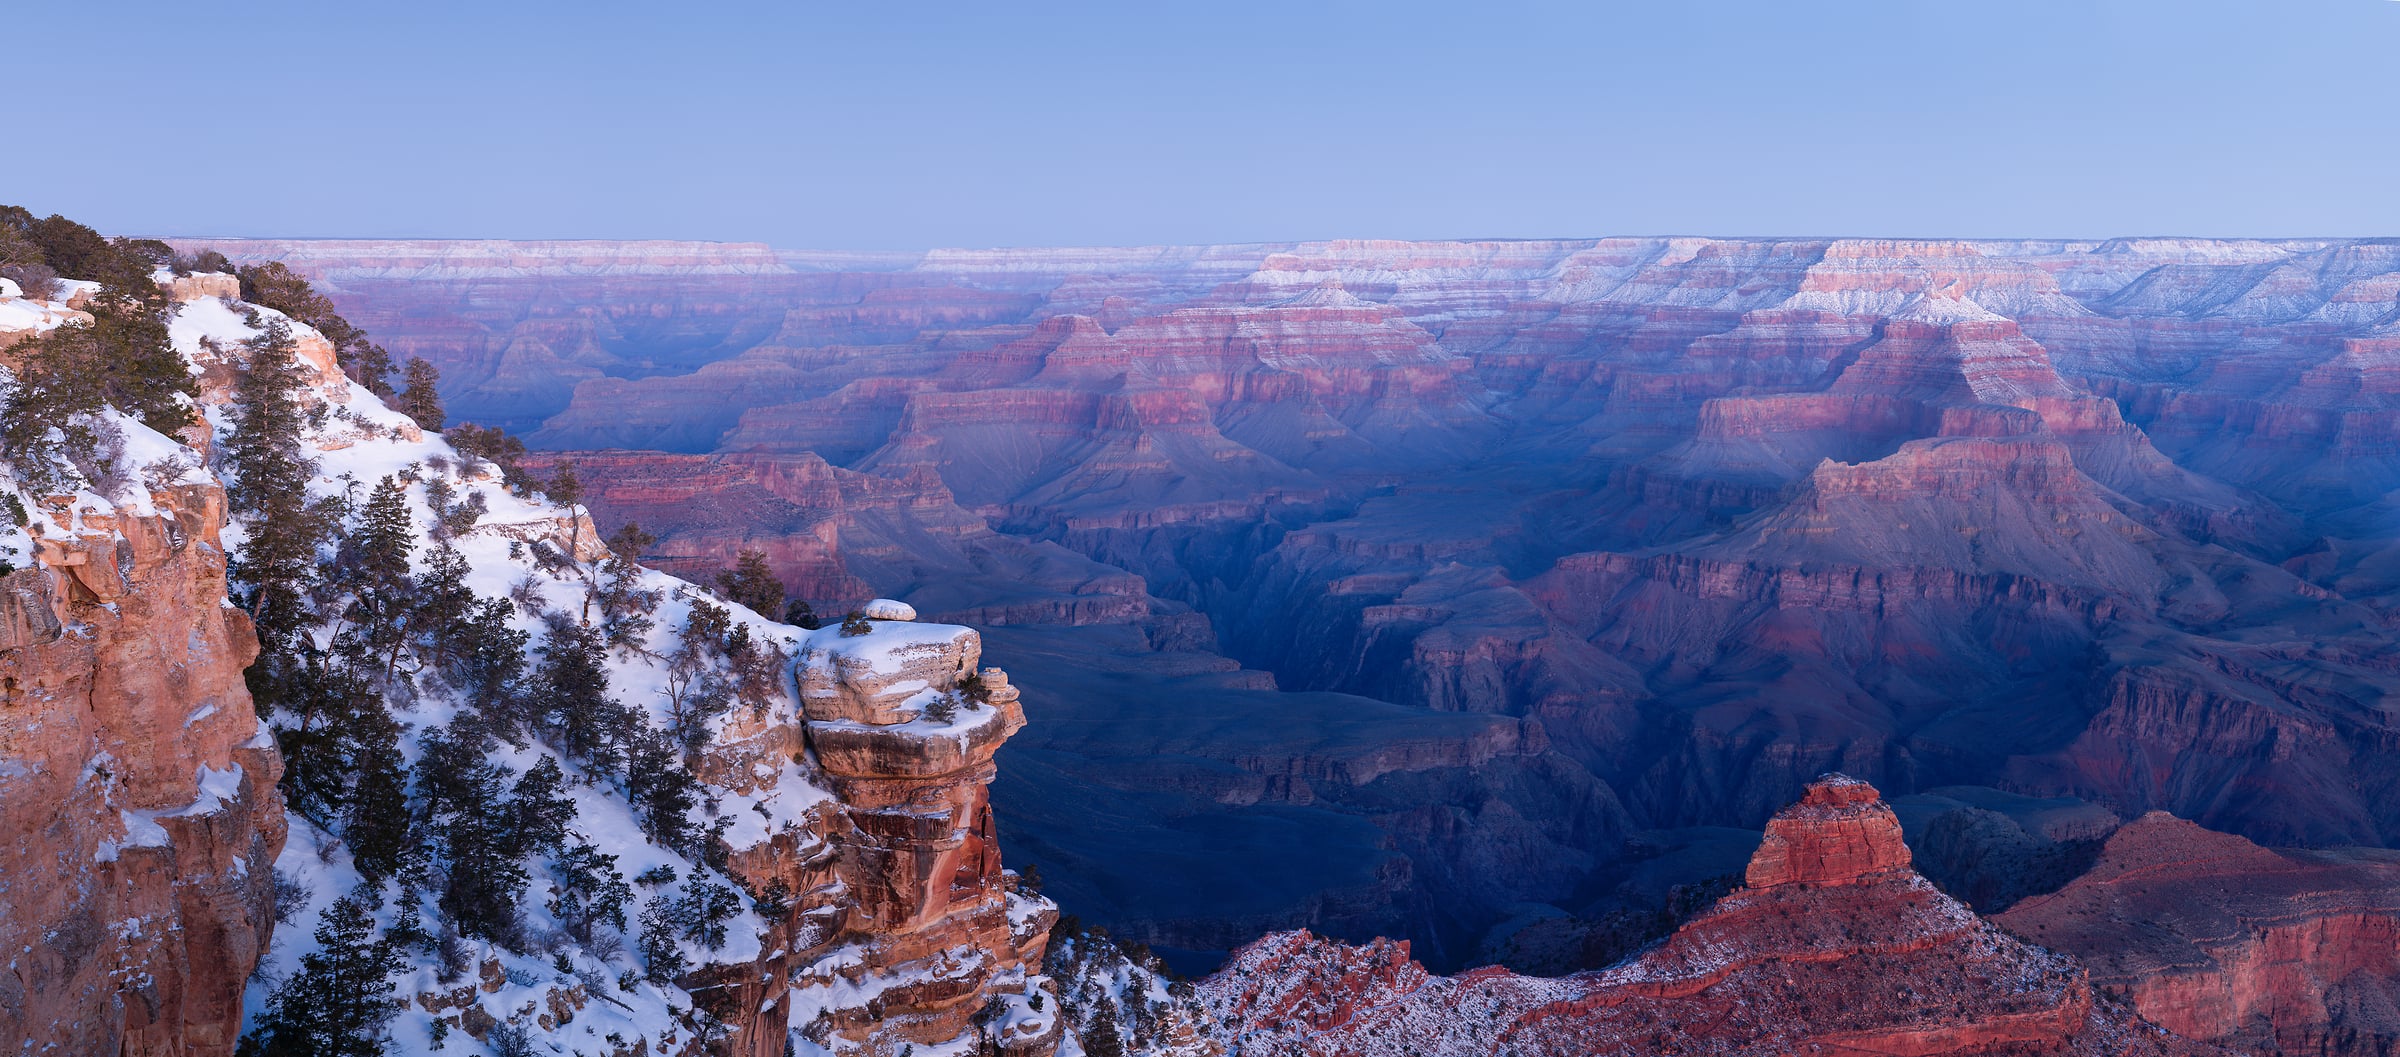 500 megapixels! A very high resolution, large-format VAST photo print of the Grand Canyon at sunrise; landscape photograph created by Greg Probst in Grand Canyon National Park, Arizona.